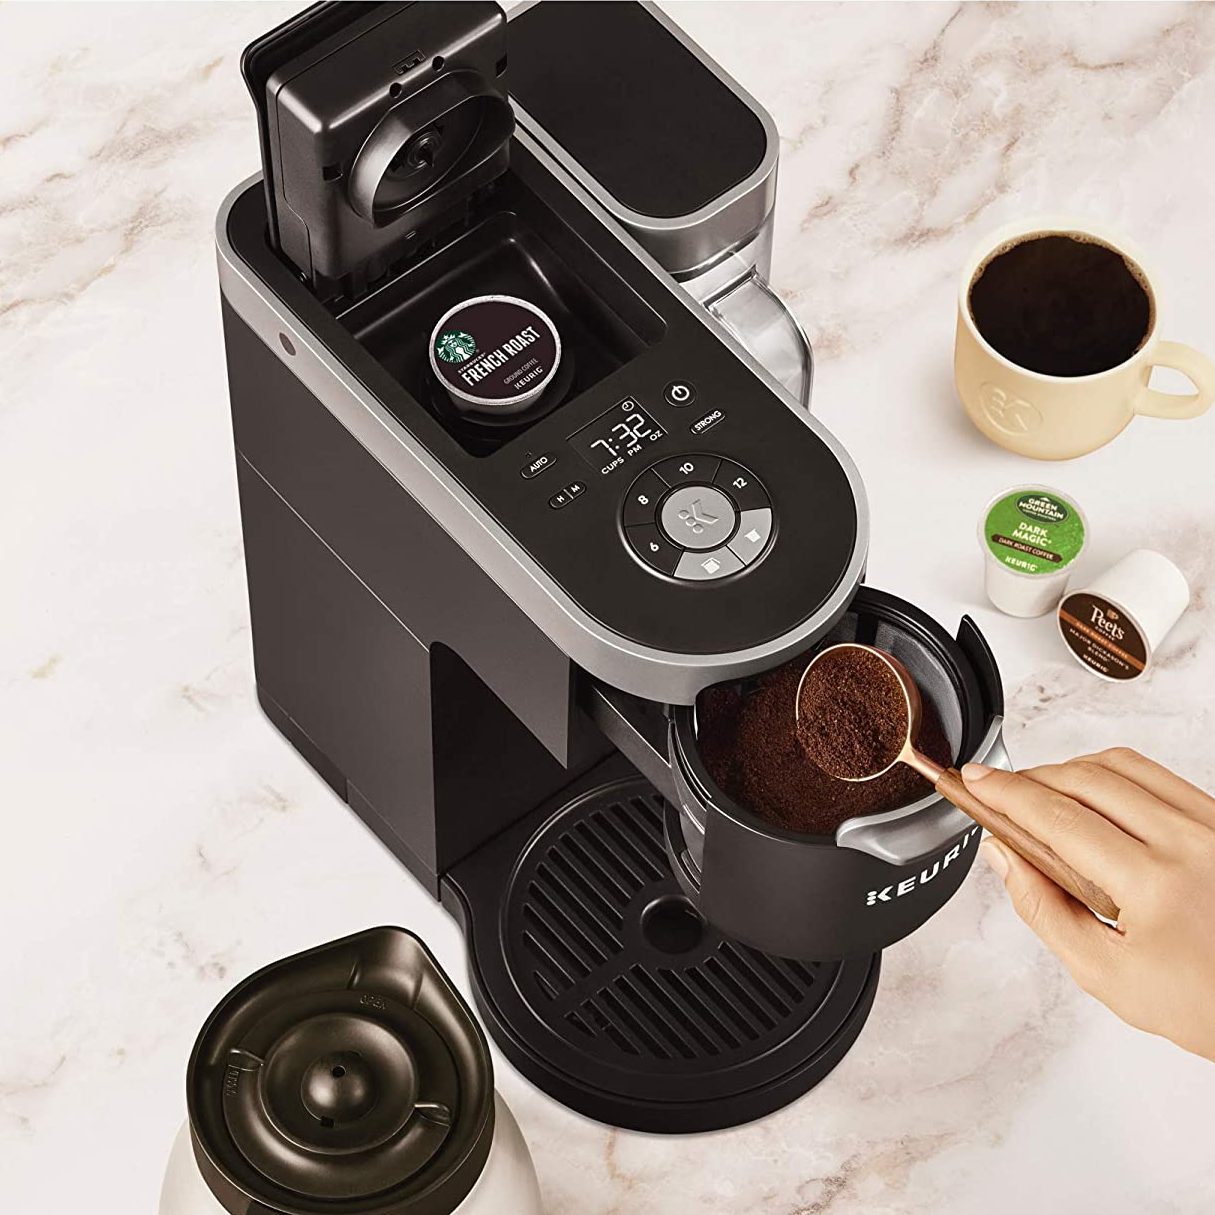 Sboly Coffee Machine 3 in 1, Tea & Coffee Maker for K Cup, Ground Coffee  and Tea Leaf, Single Serve Coffee Maker Brewer with Self Cleaning, Fast  Brewing Tech 